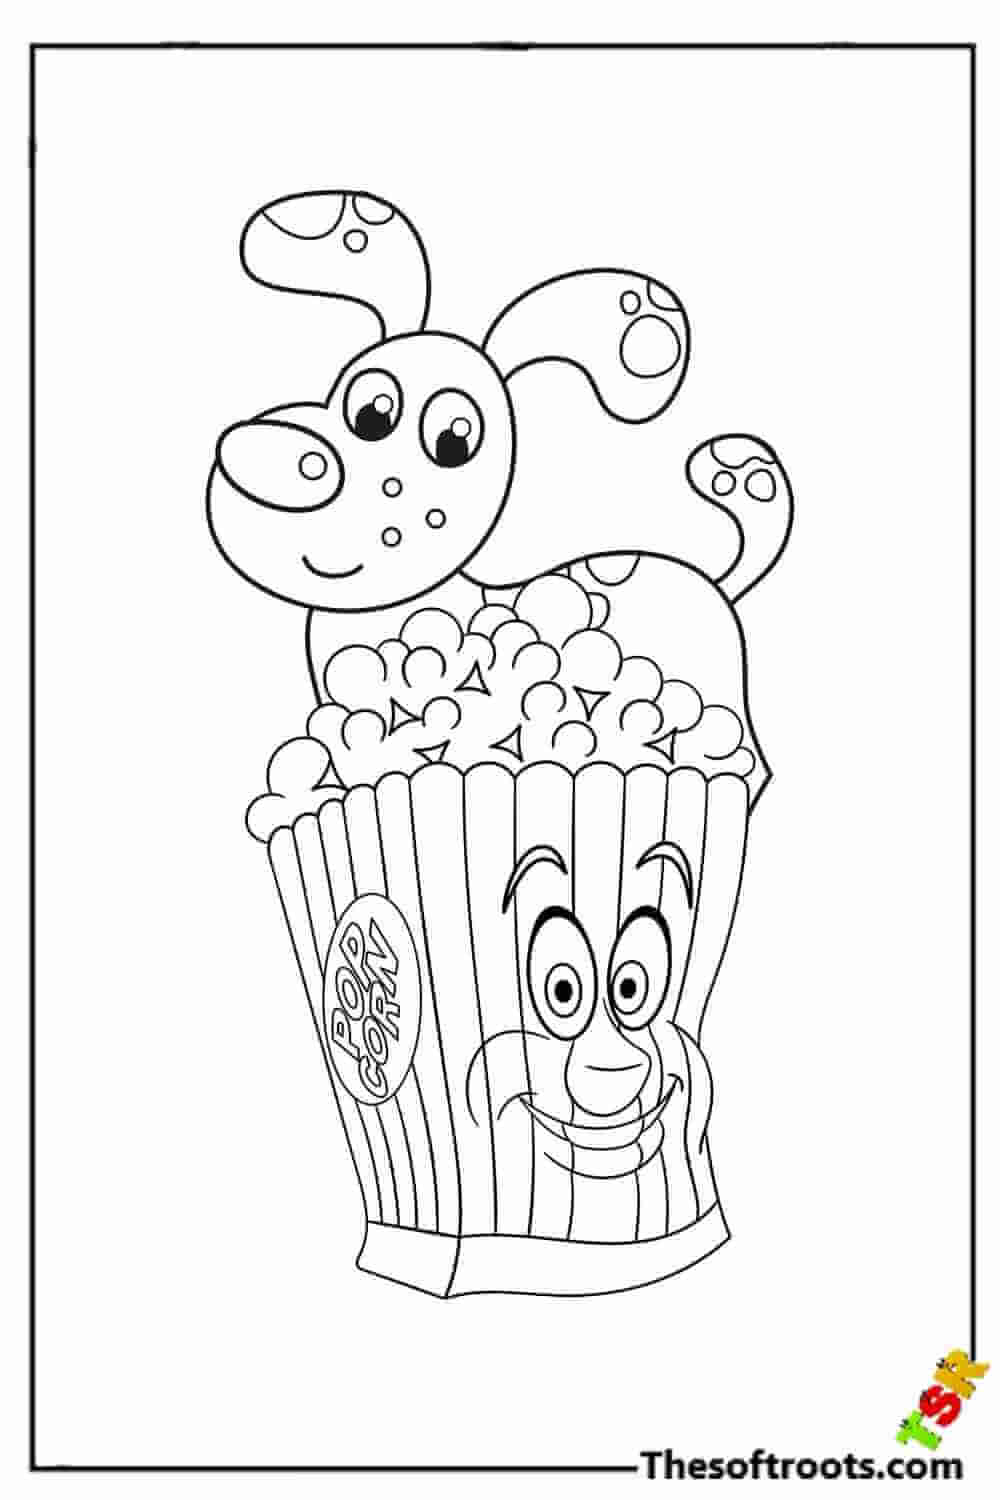 Puppy and popcorn coloring pages